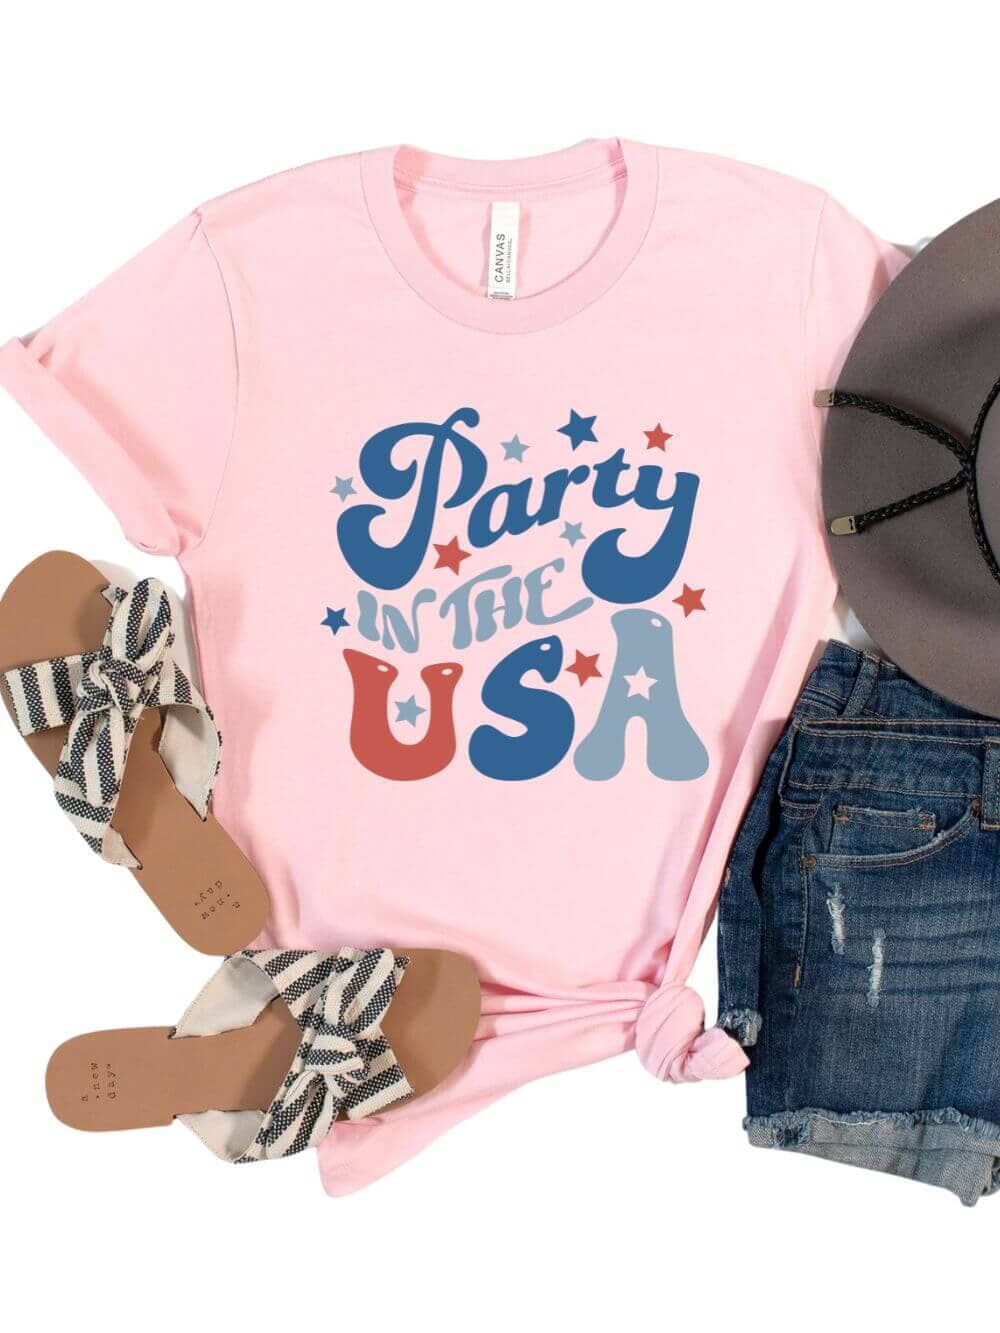 Party in the USA Patriotic 4th of July Patriotic Graphic T-Shirt - Sydney So Sweet